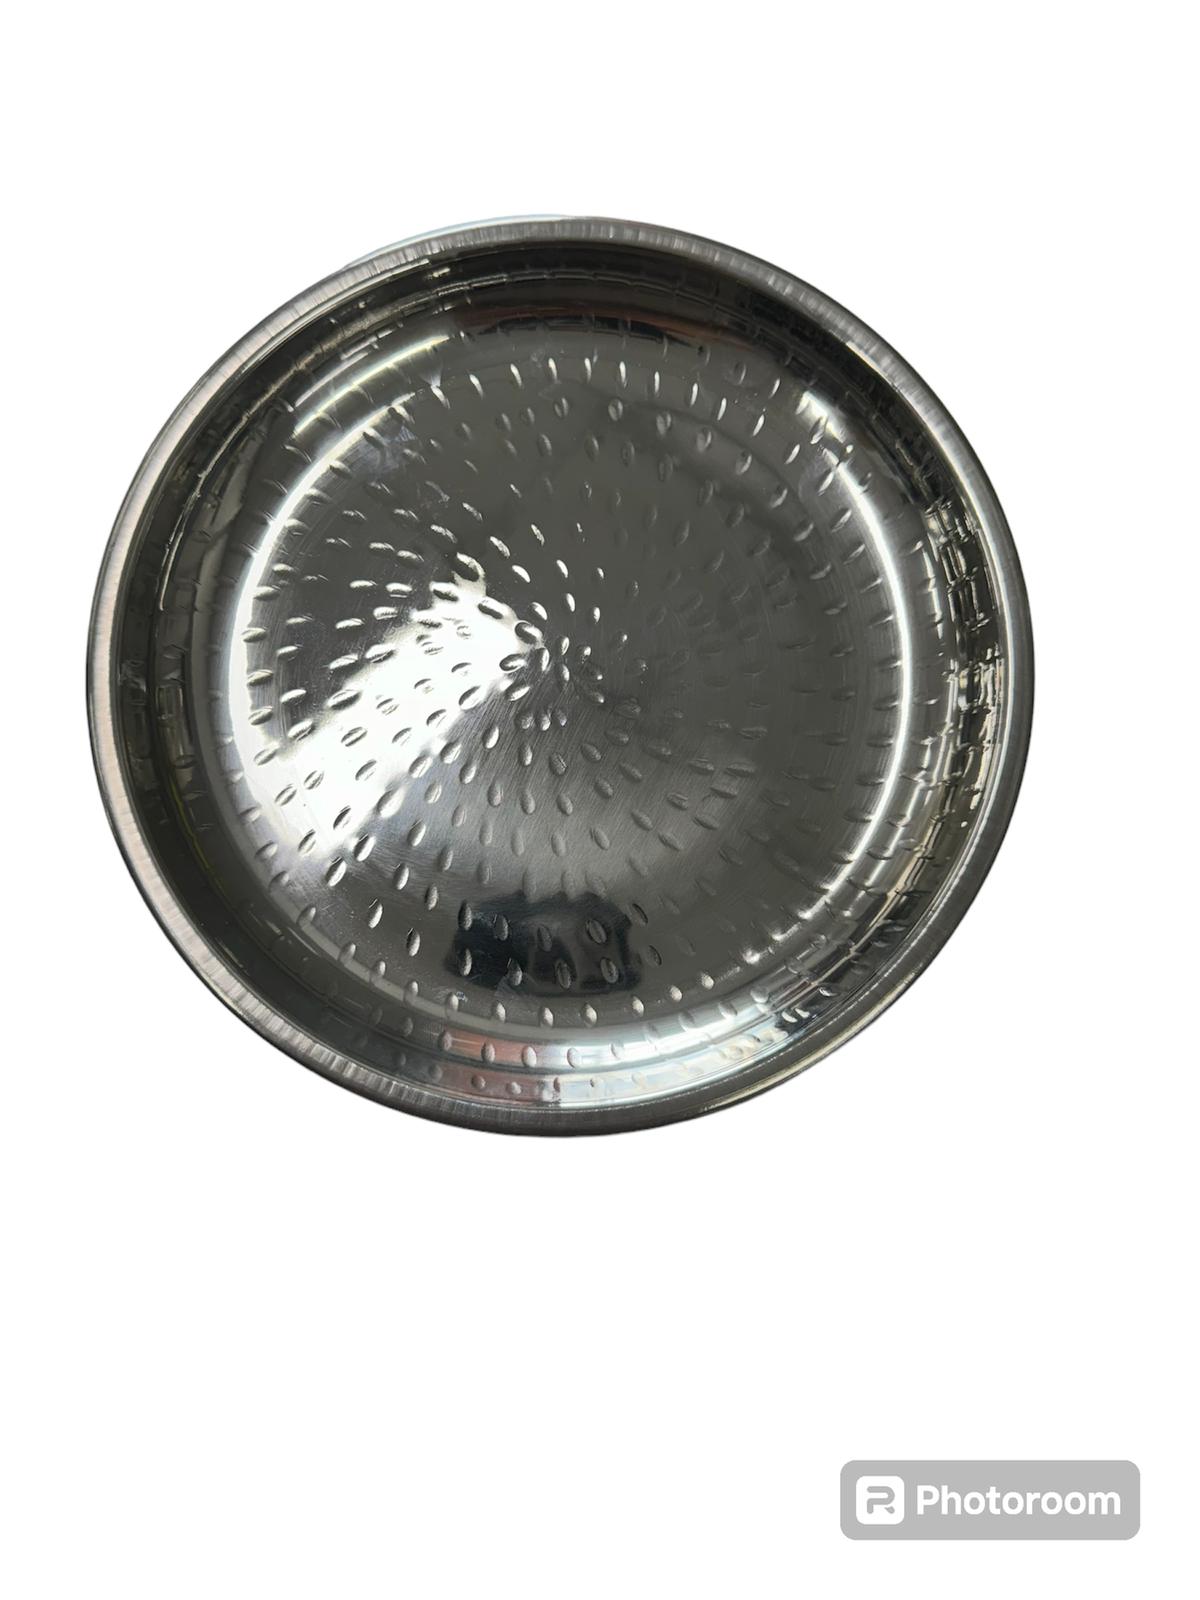 STAINLESS STEEL ROUND TRAY/PLATE HAMMERED 8"